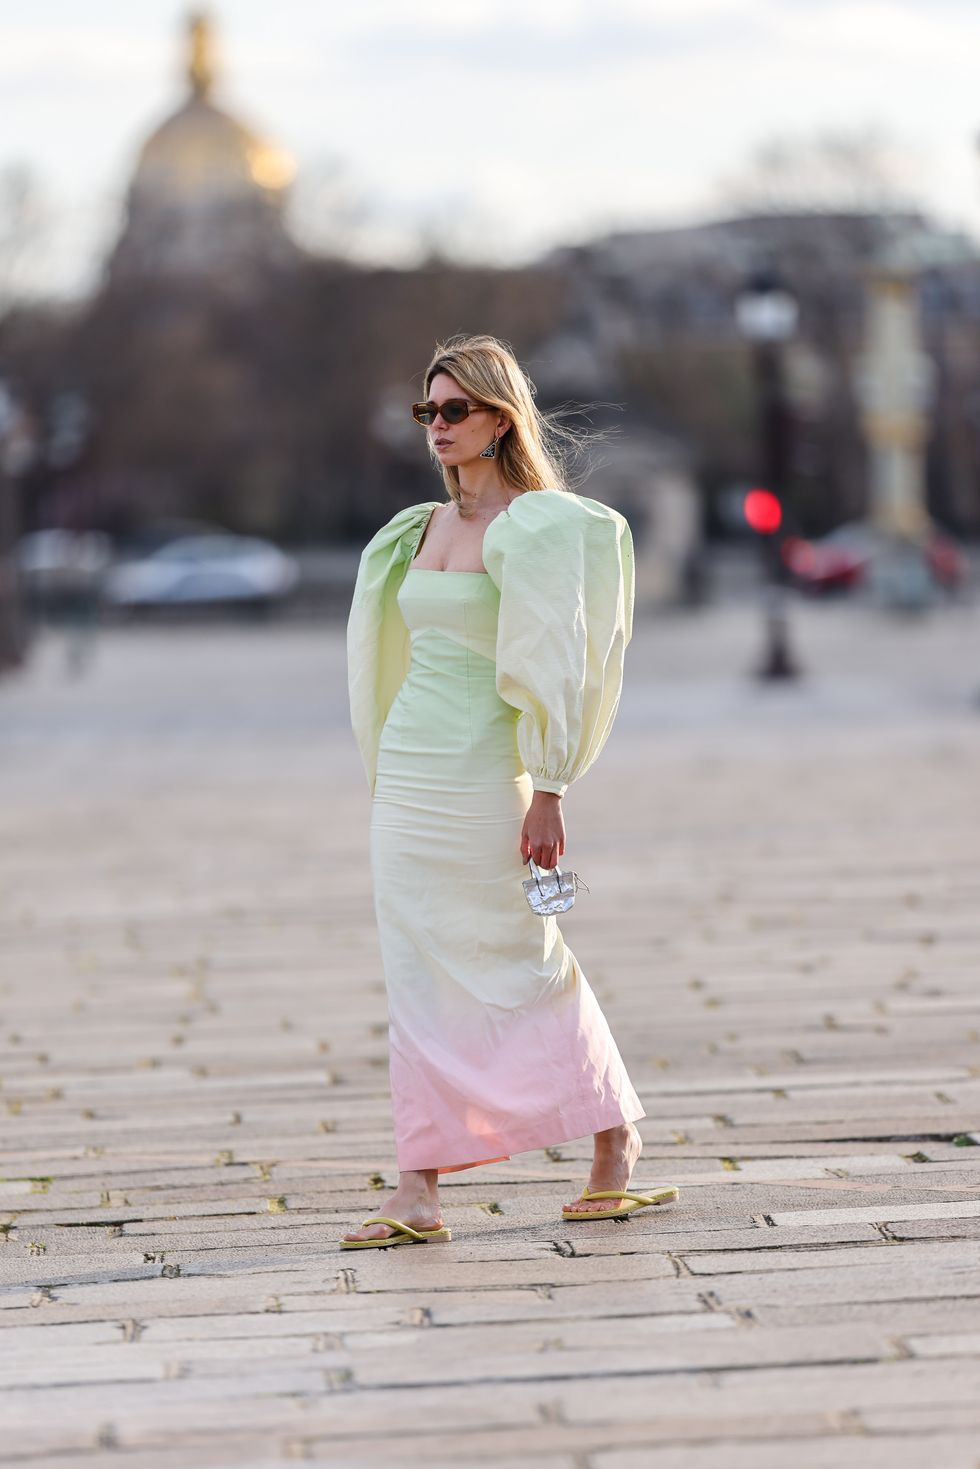 paris, france   march 25 natalia verza mascaradaparis wears sunglasses, a pastel colored green and pink oversized tie and dye midi dress with low neck and puff large sleeves from sandra mansour x agl, a silver shiny mini bag, yellow flip flop sandals, during a street style fashion photo session, on march 25, 2021 in paris, france photo by edward berthelotgetty images